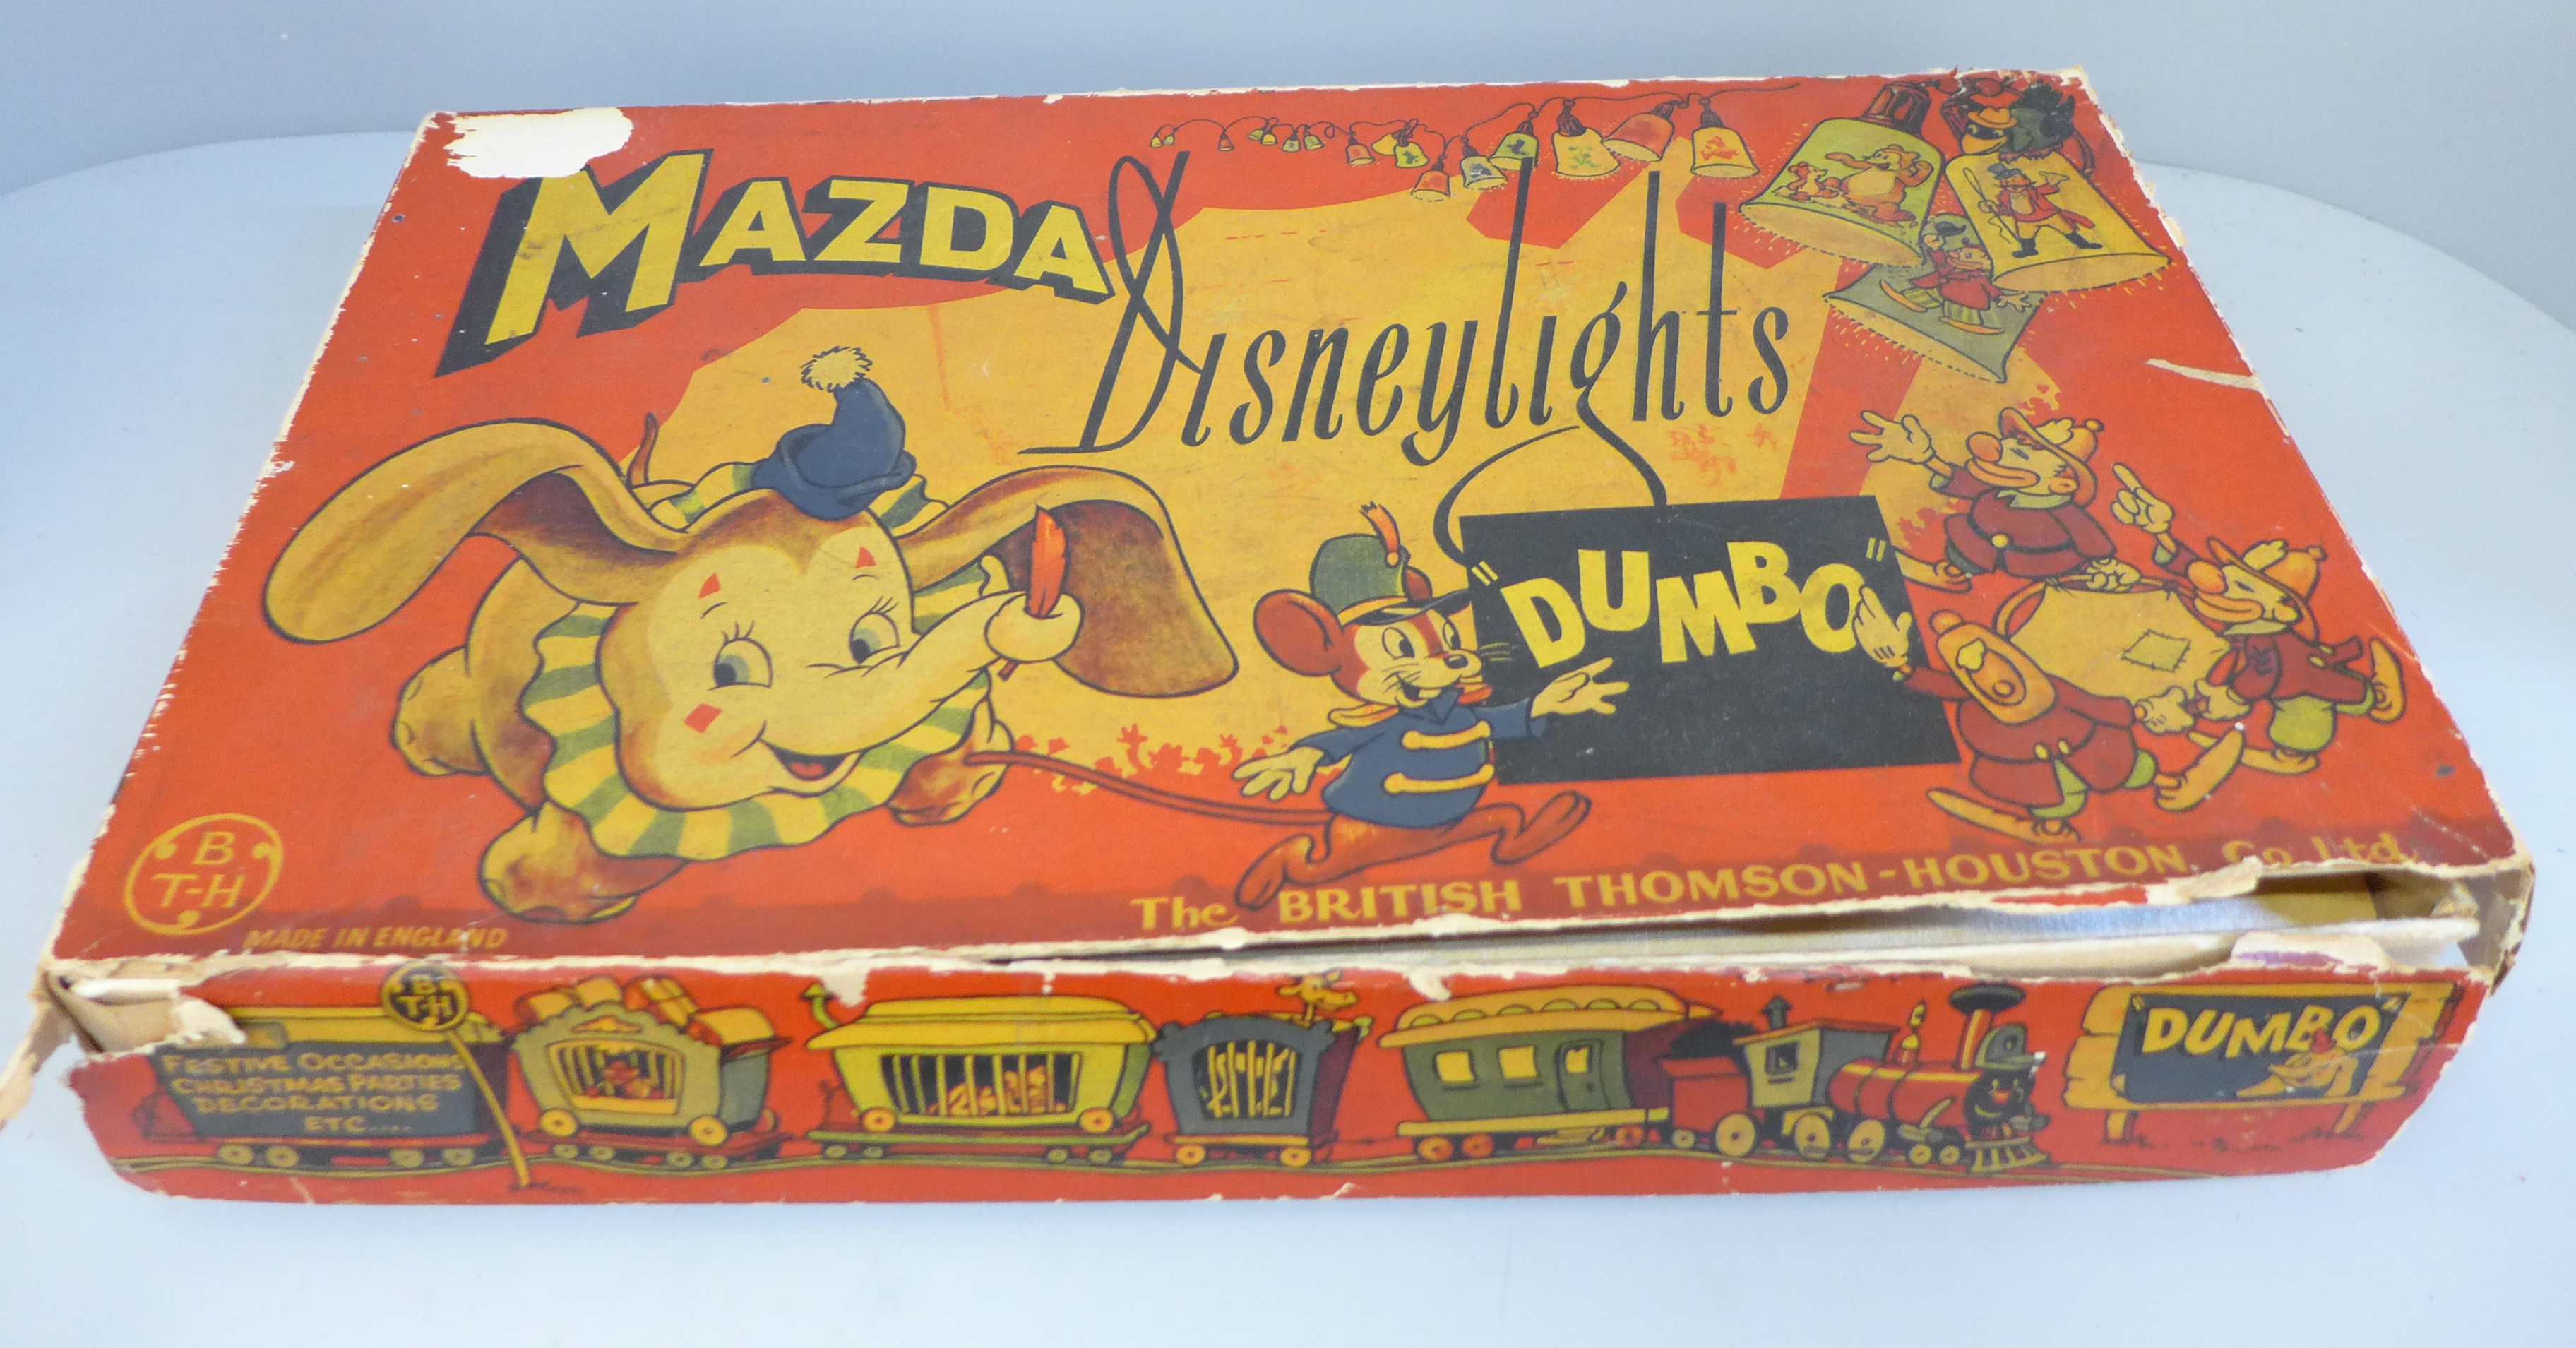 A Mazda Disney Lights Dumbo lamp outfit - Image 7 of 7